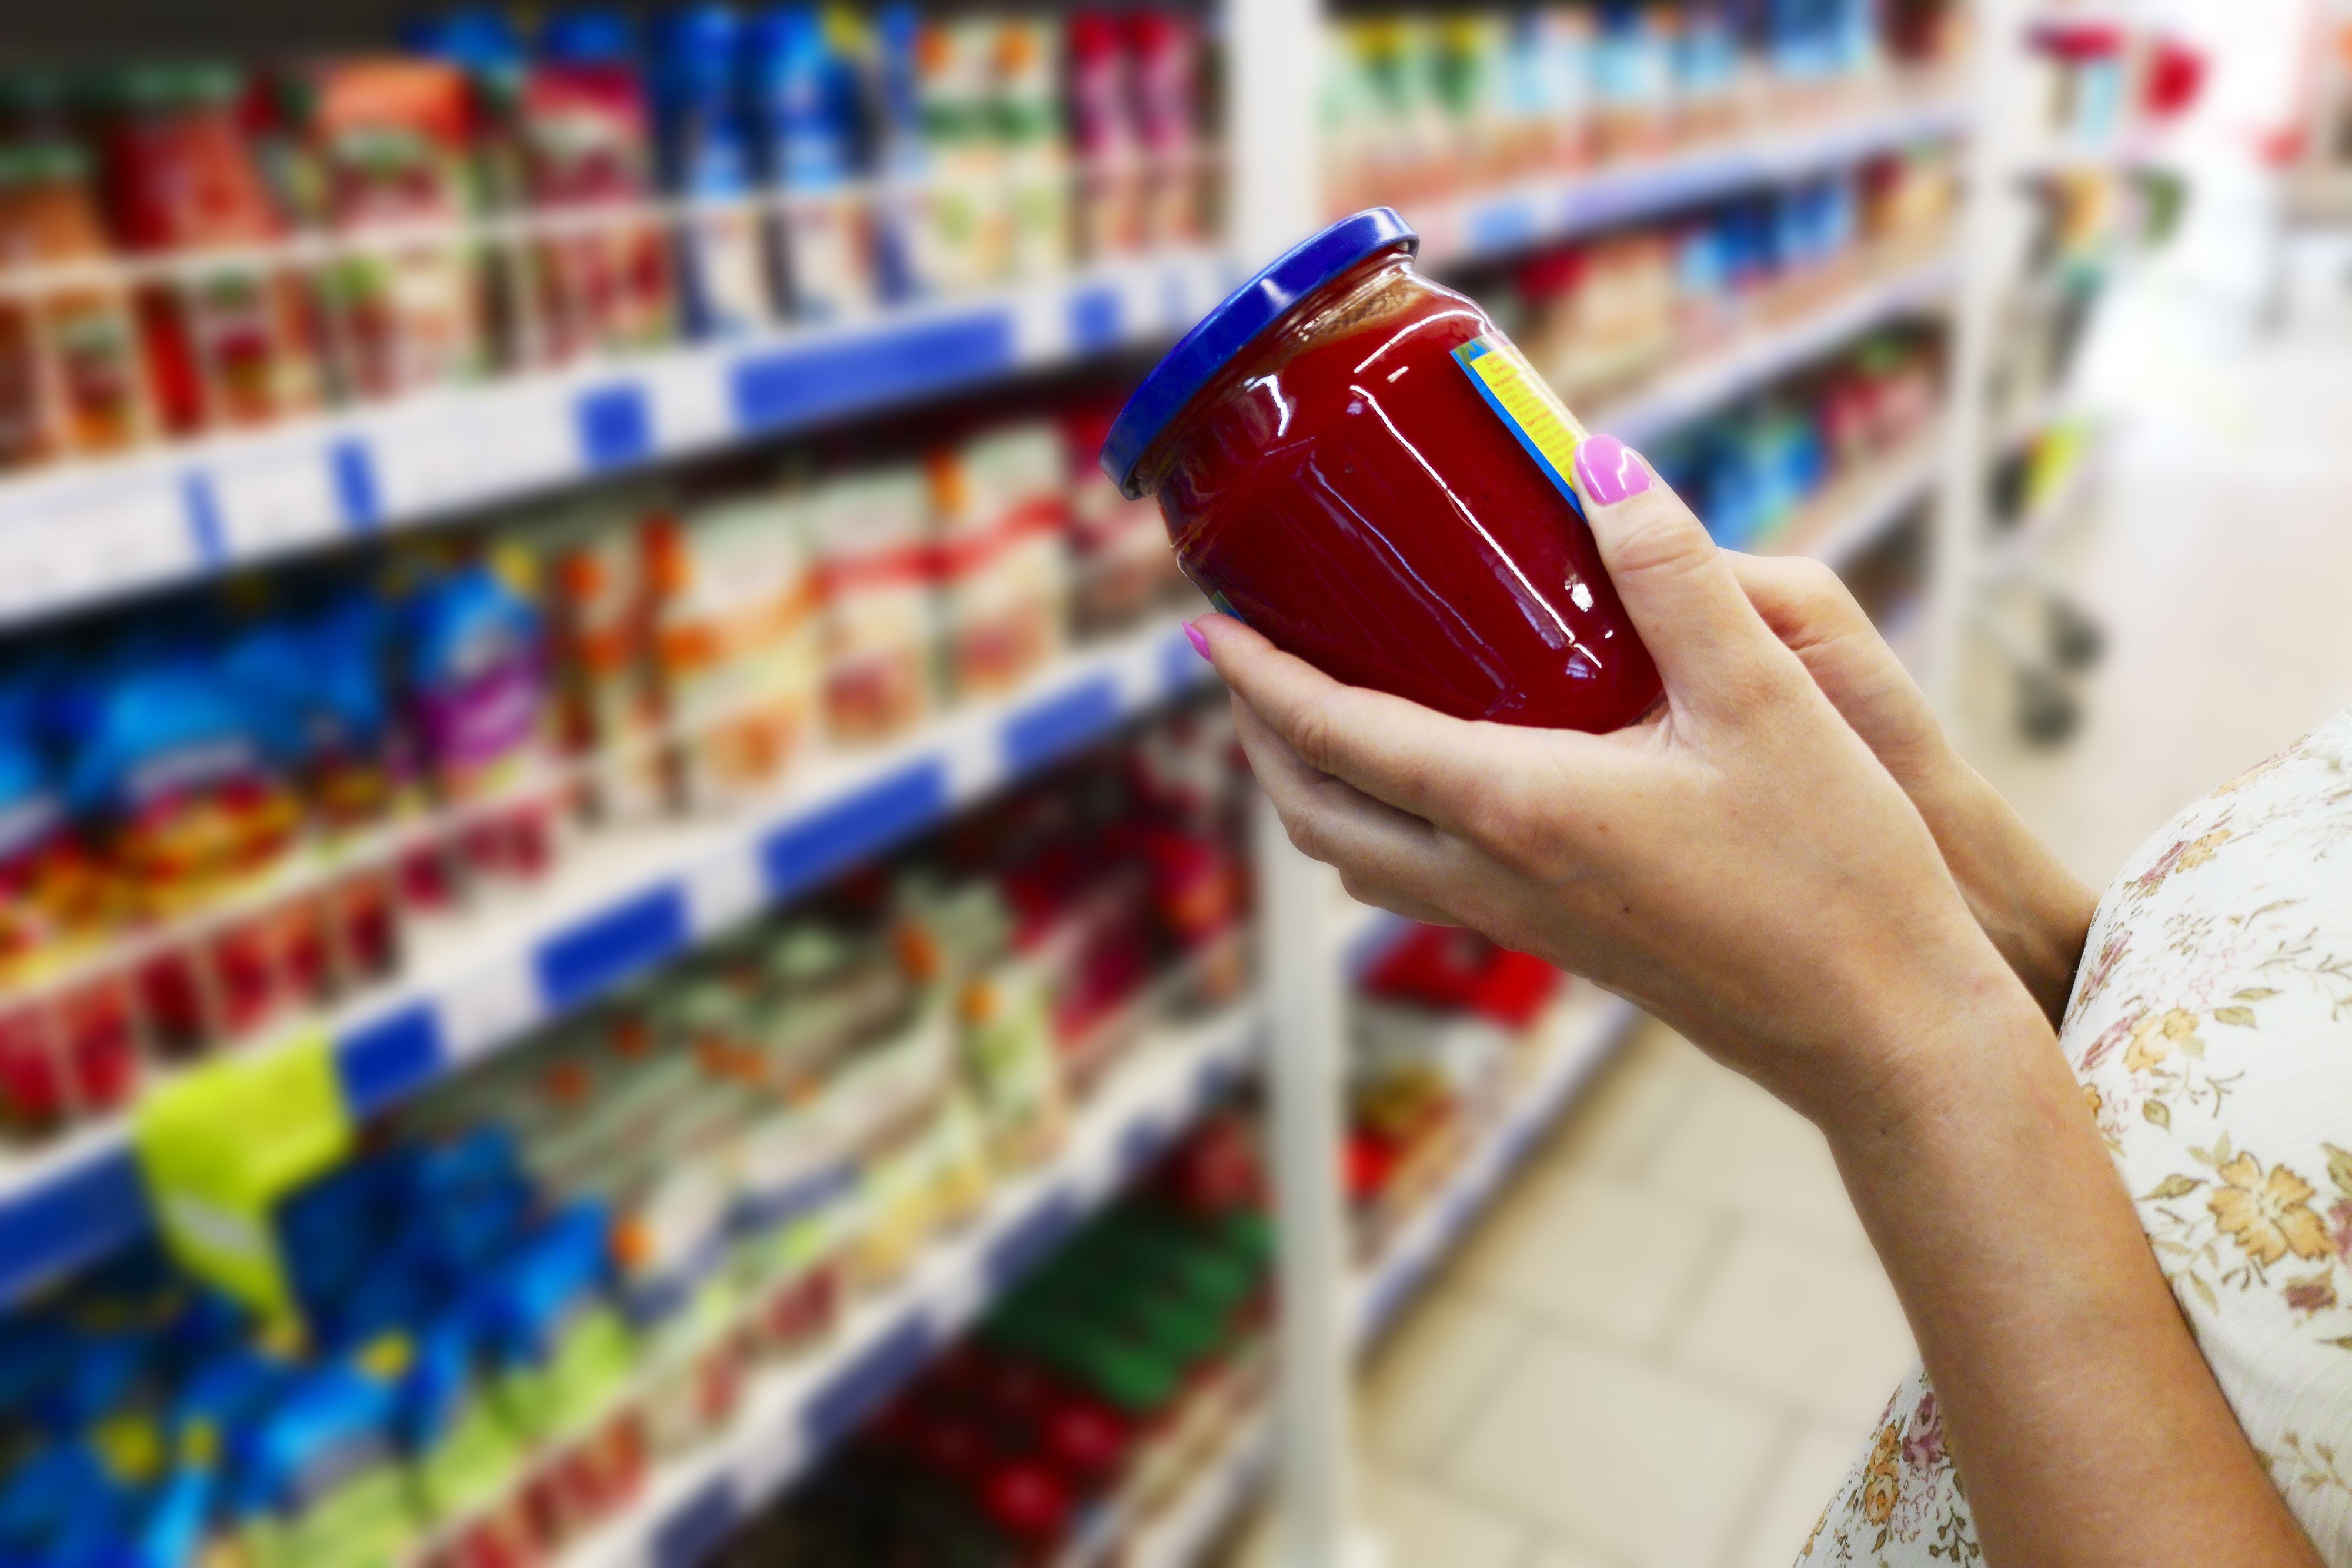 Glass jar of sauce in the hands of the buyer. Sauce in the hands of the buyer at the grocery store